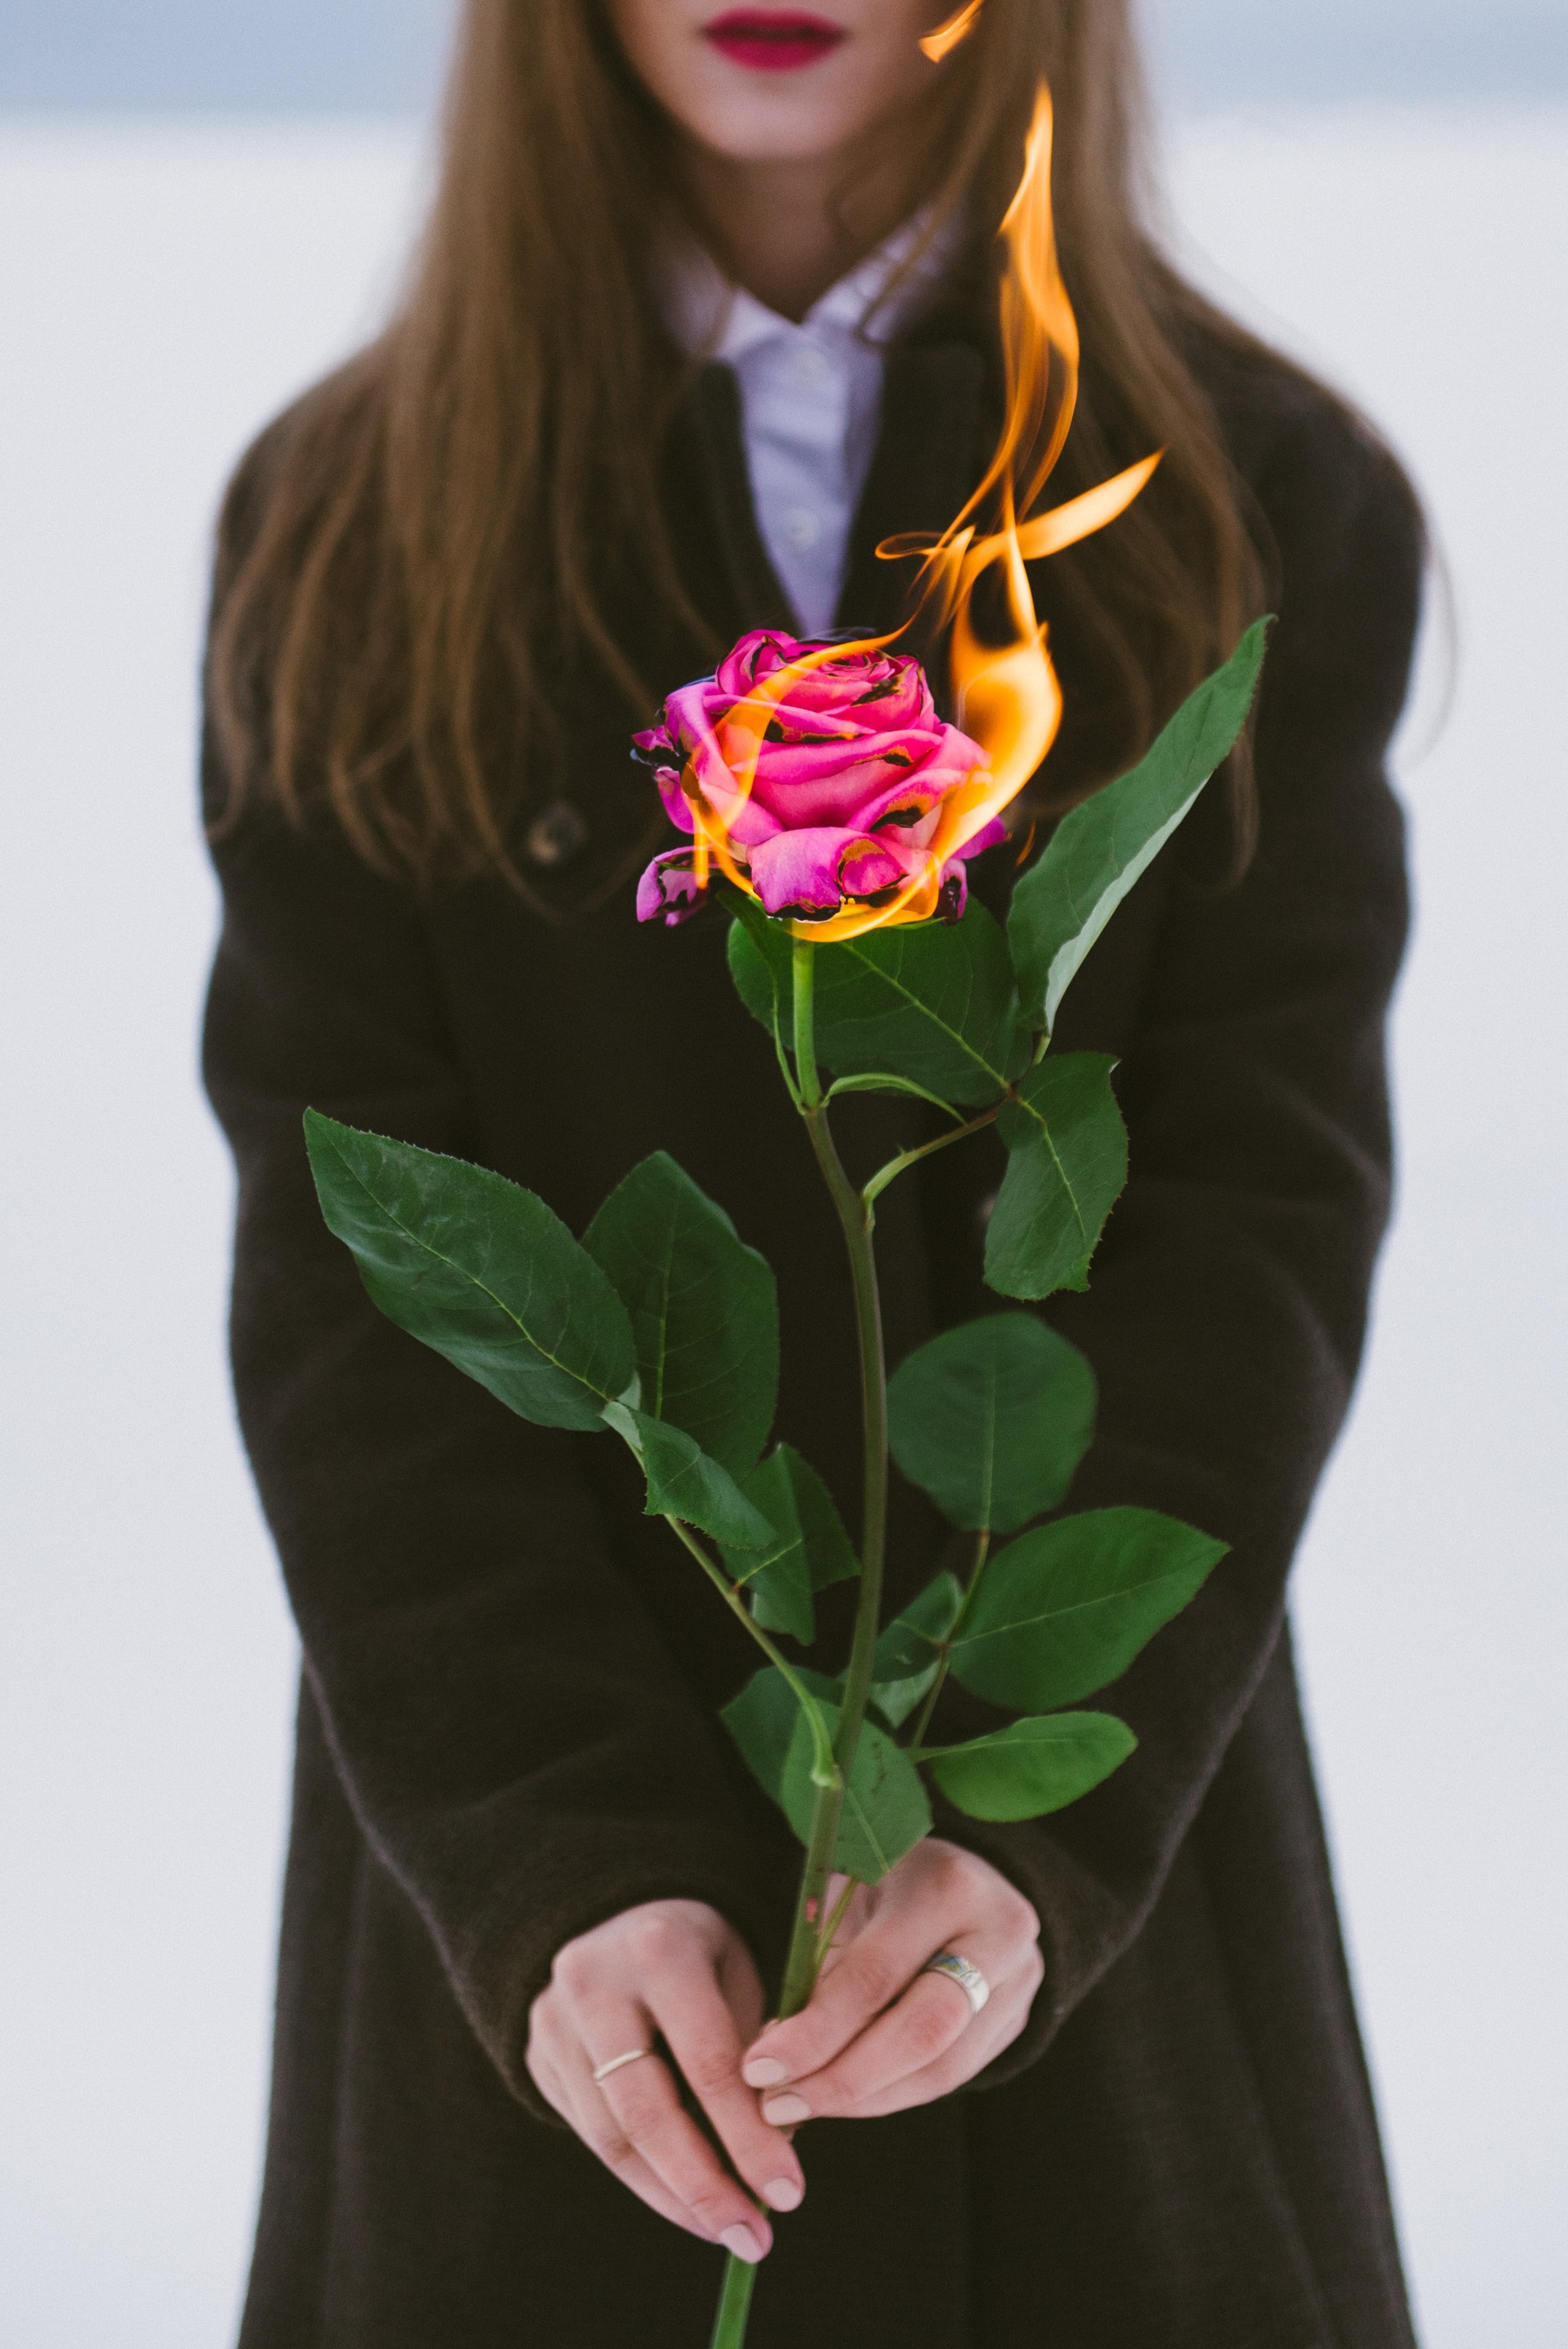 Download mobile wallpaper Fire, Miscellaneous, Miscellanea, Flower, Rose, Flame, Rose Flower, Hands, Girl for free.